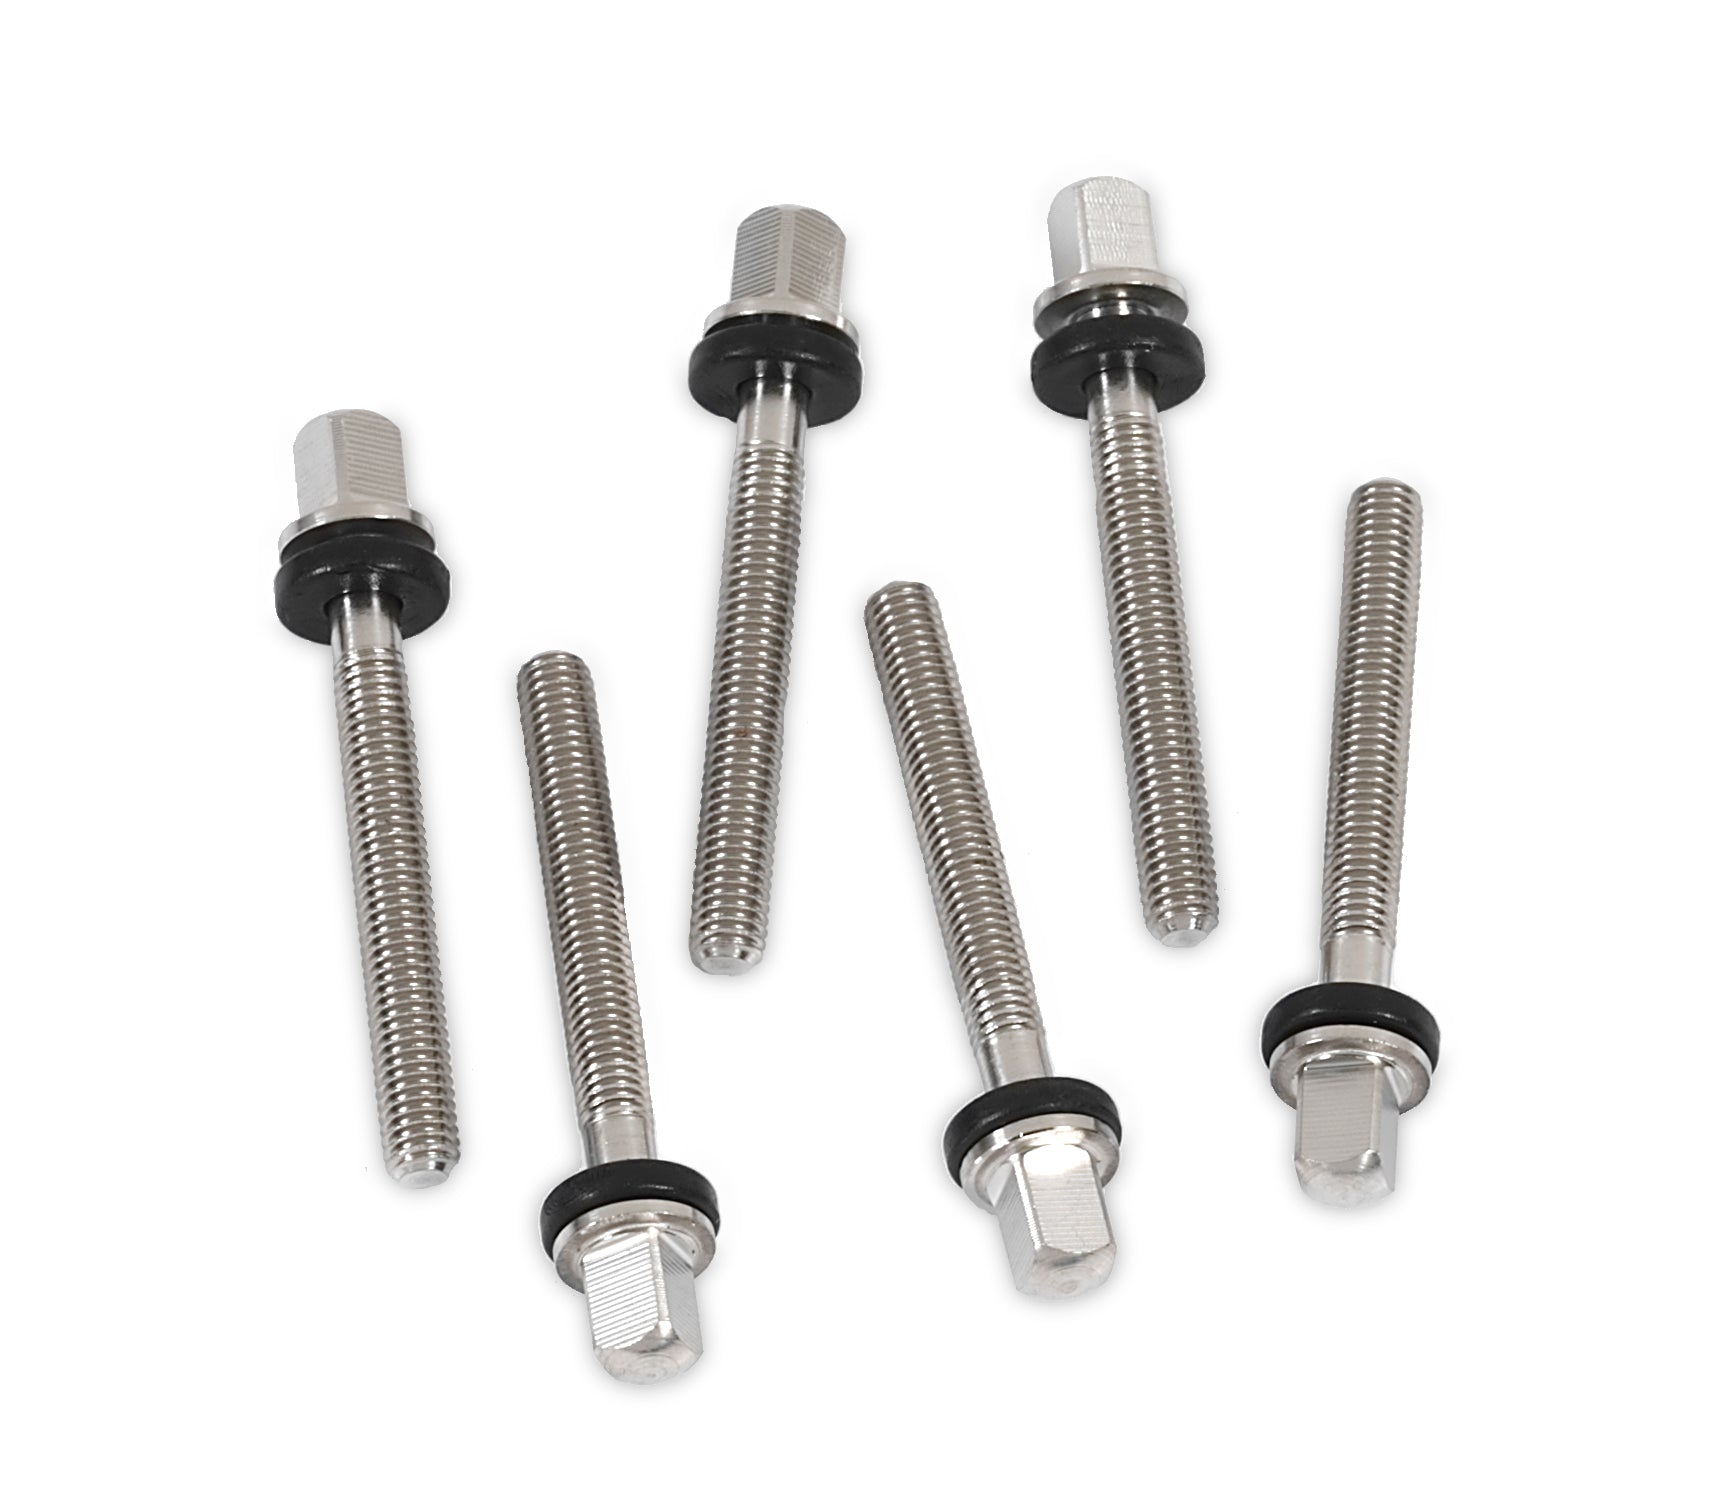 DWSM165S - Stainless Tension Rod M5-.8x1.65 in (6pk)